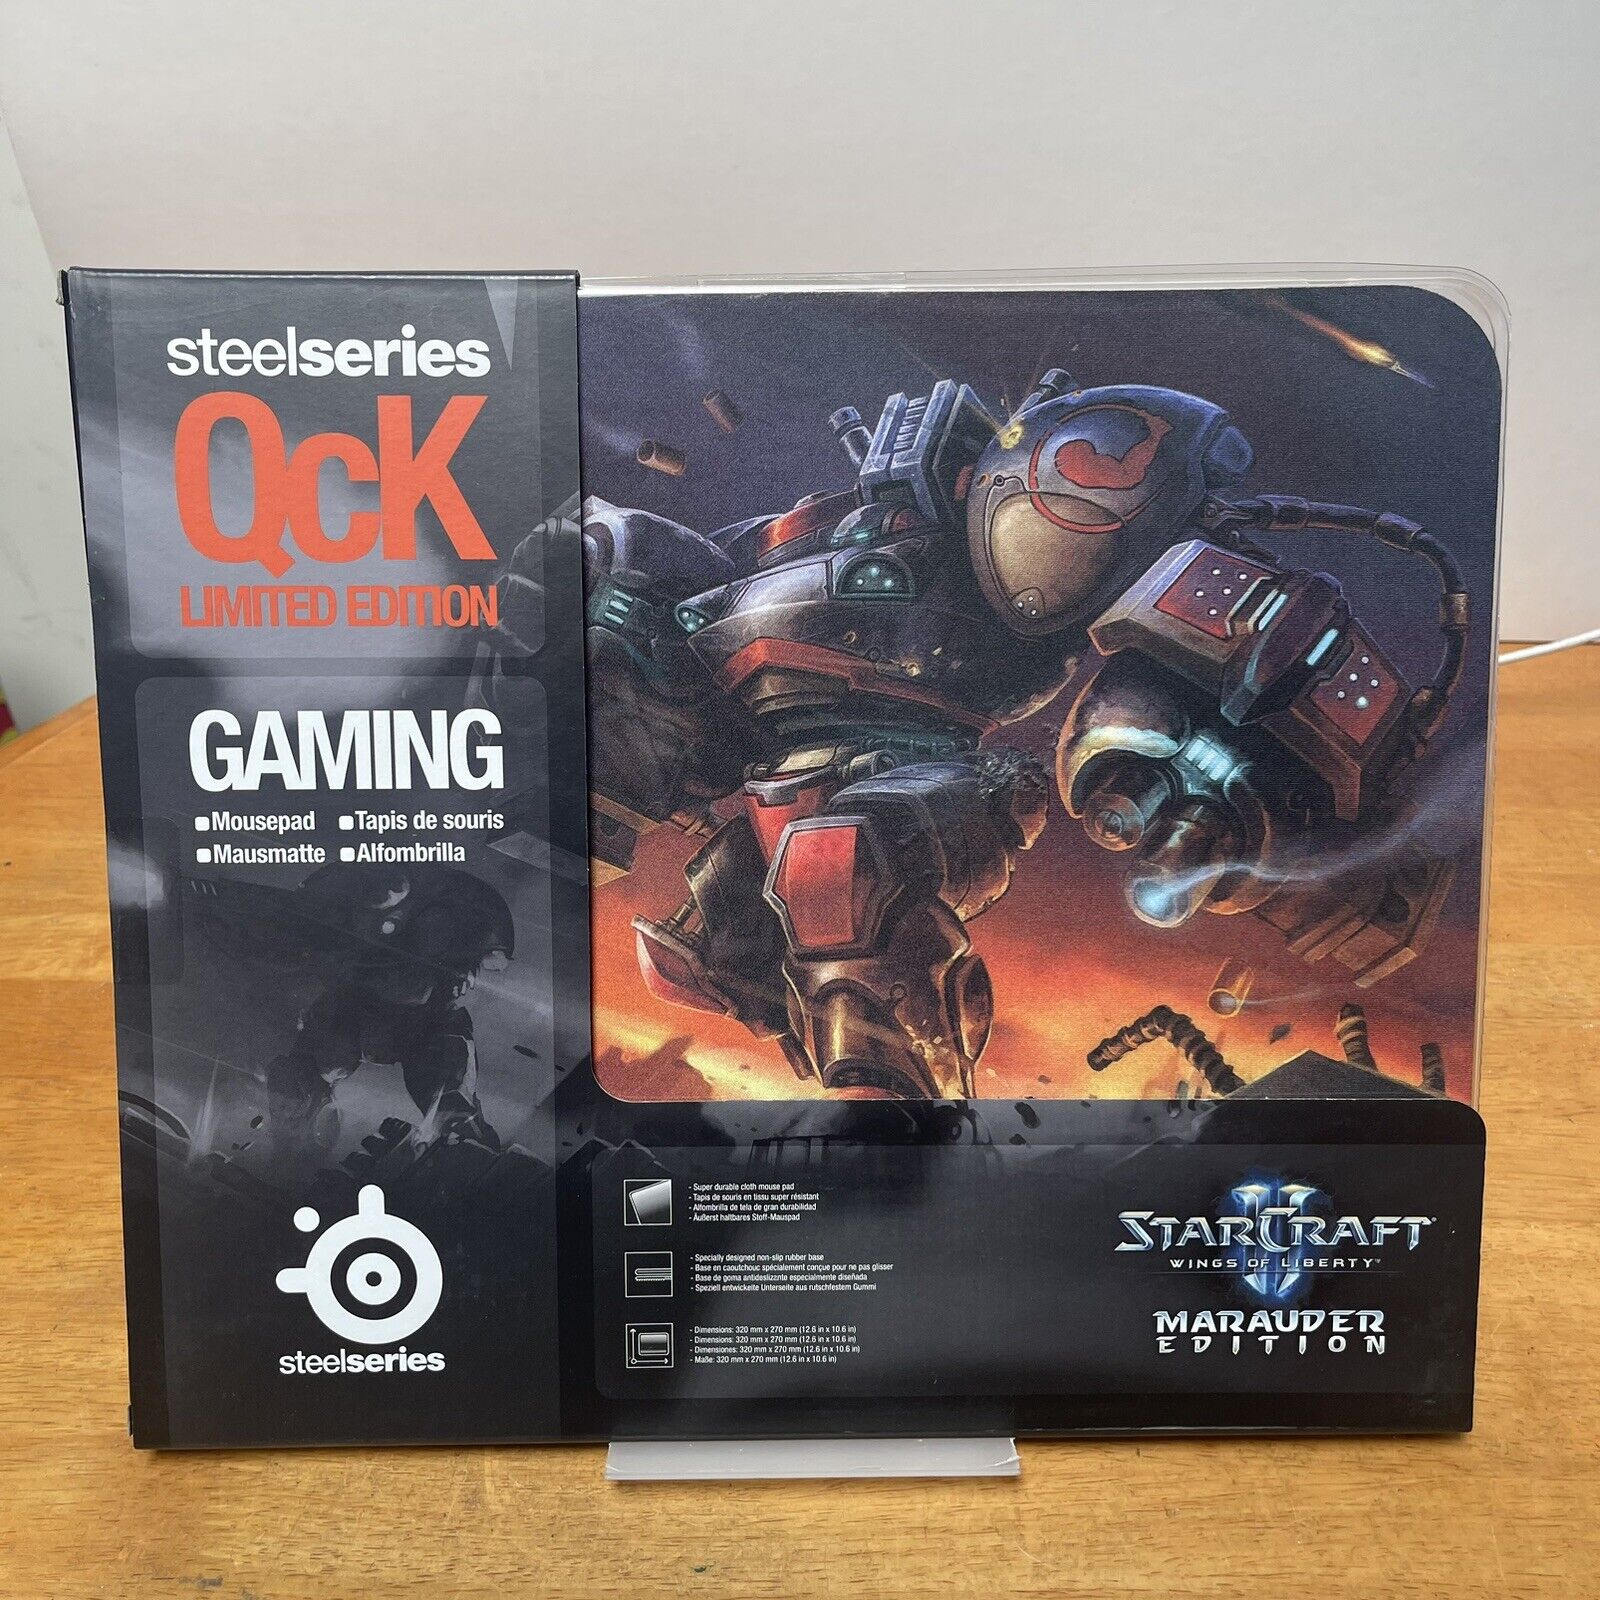 NEW ✅ SteelSeries QCK Limited Edition Gaming Mouse Pad Starcraft Marauder